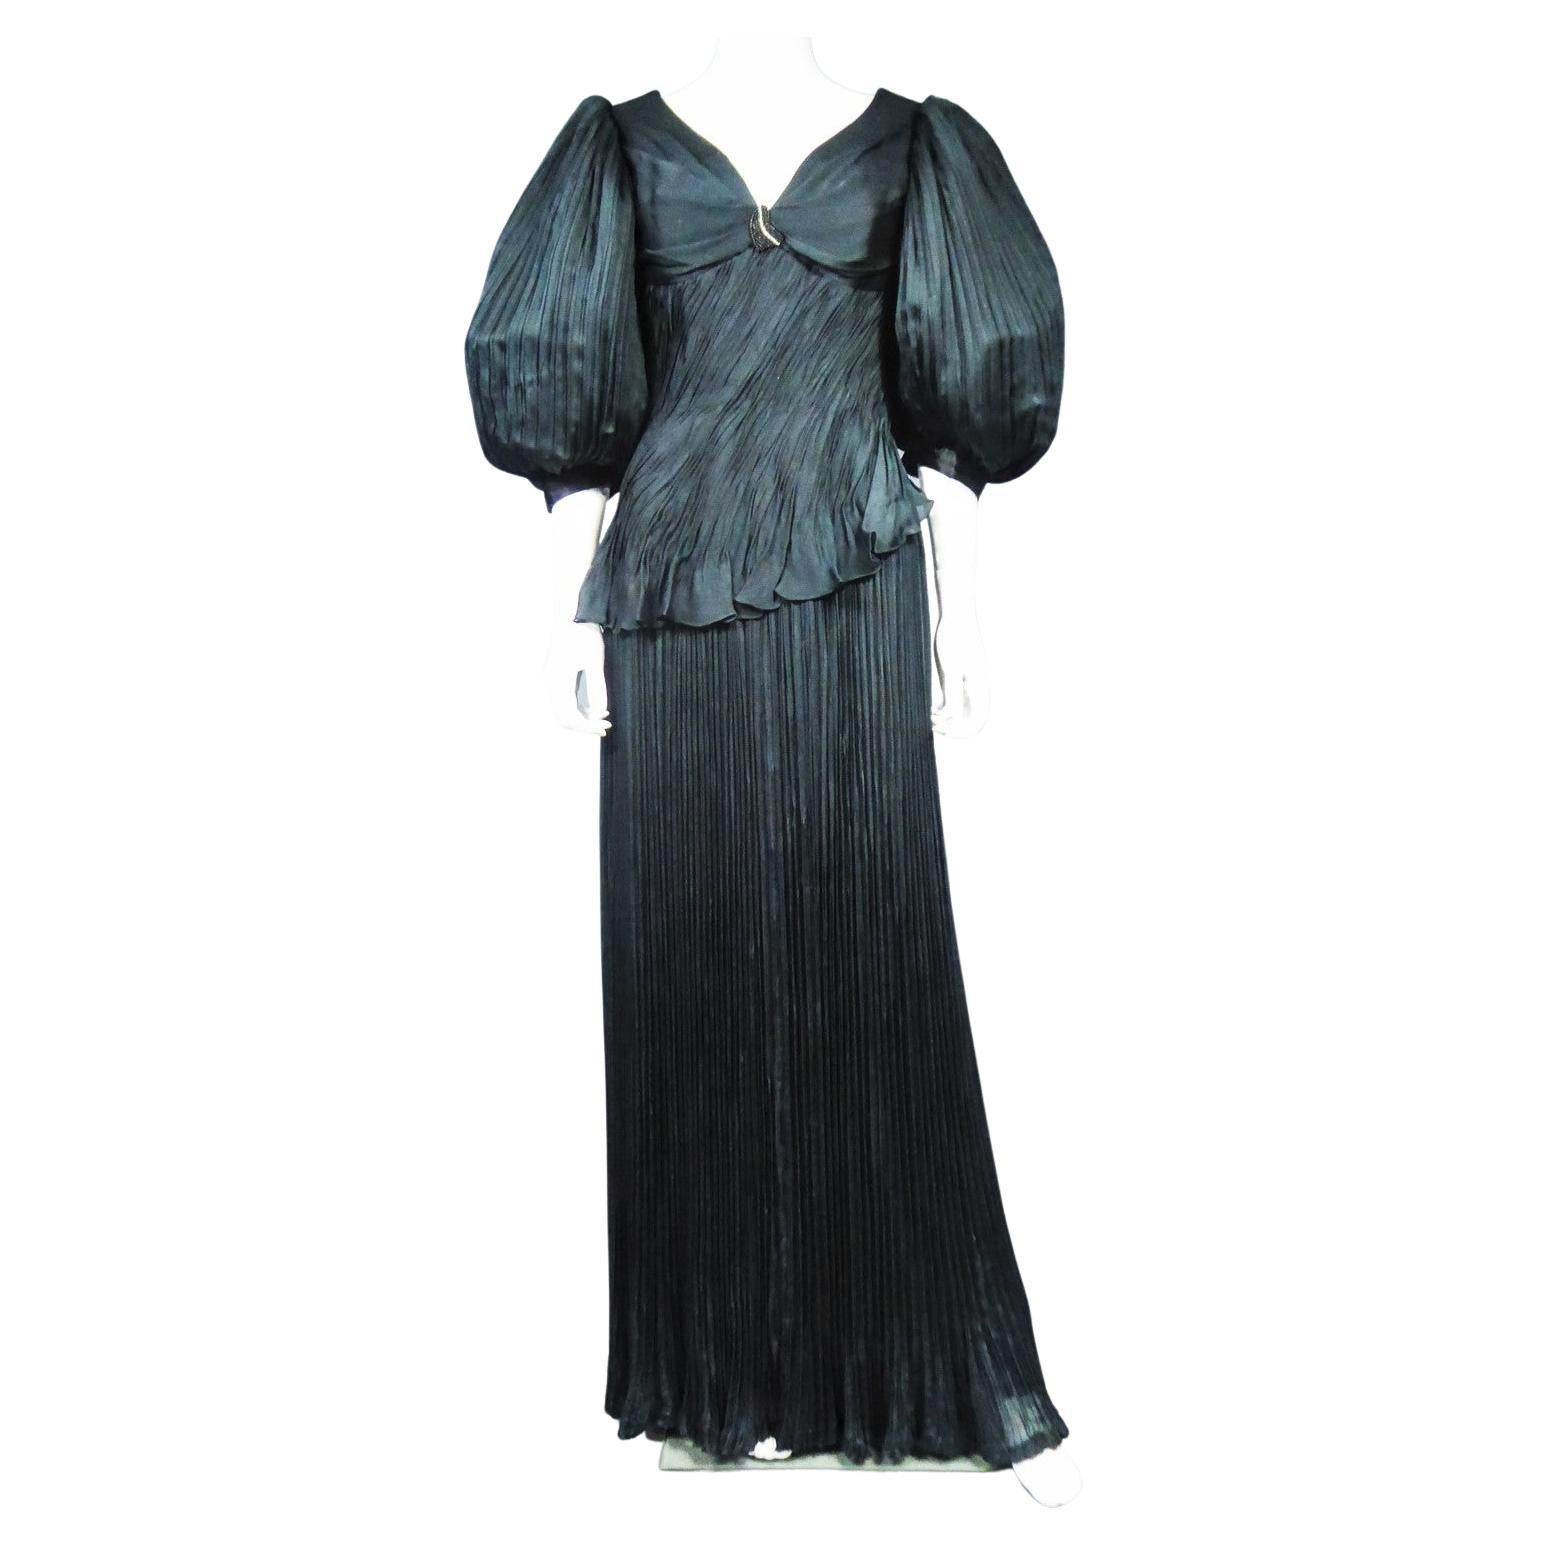 An Emanuel Ungaro French Evening Dress Numbered 295-5-85 Circa 1985/1990